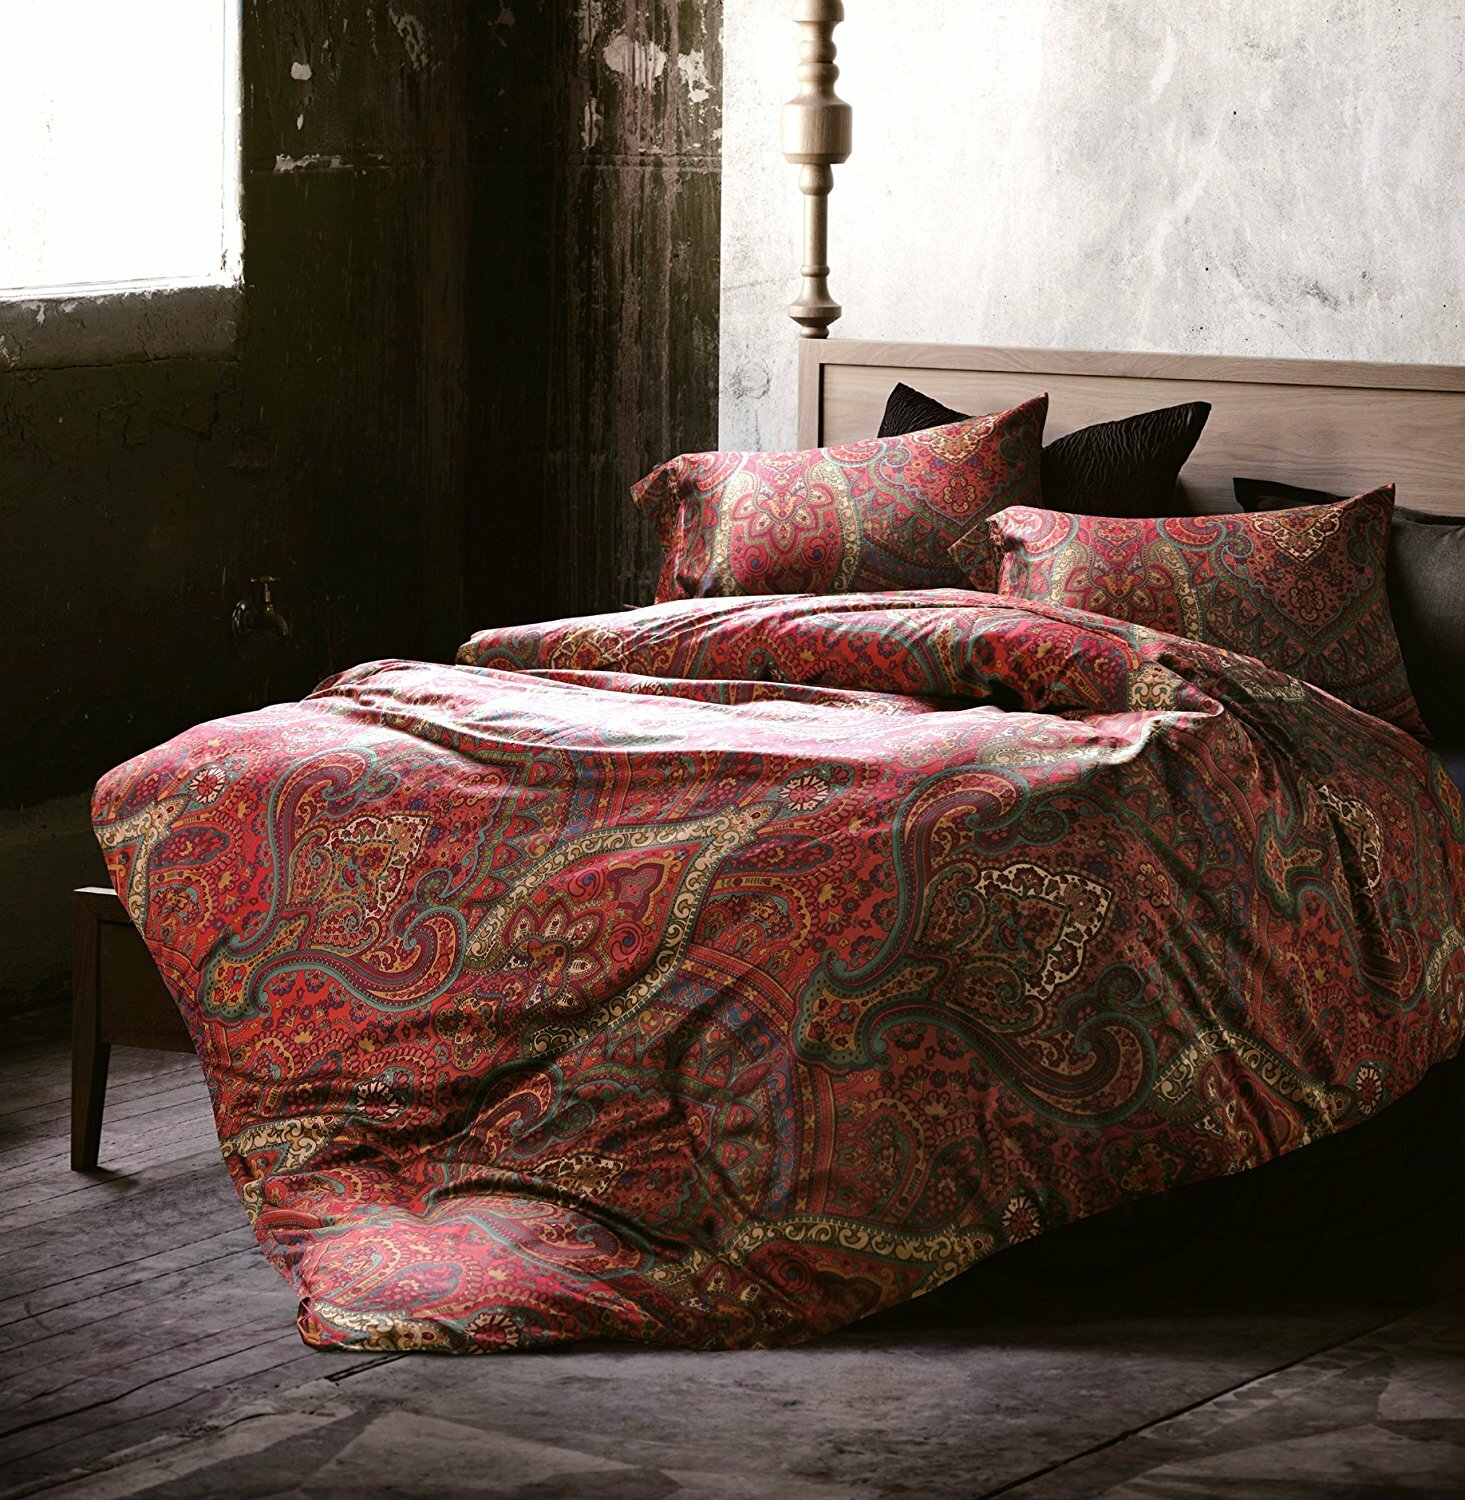 Details about   Indian Paisley Super King Size Bed Cover with Pillow 100% Cotton 